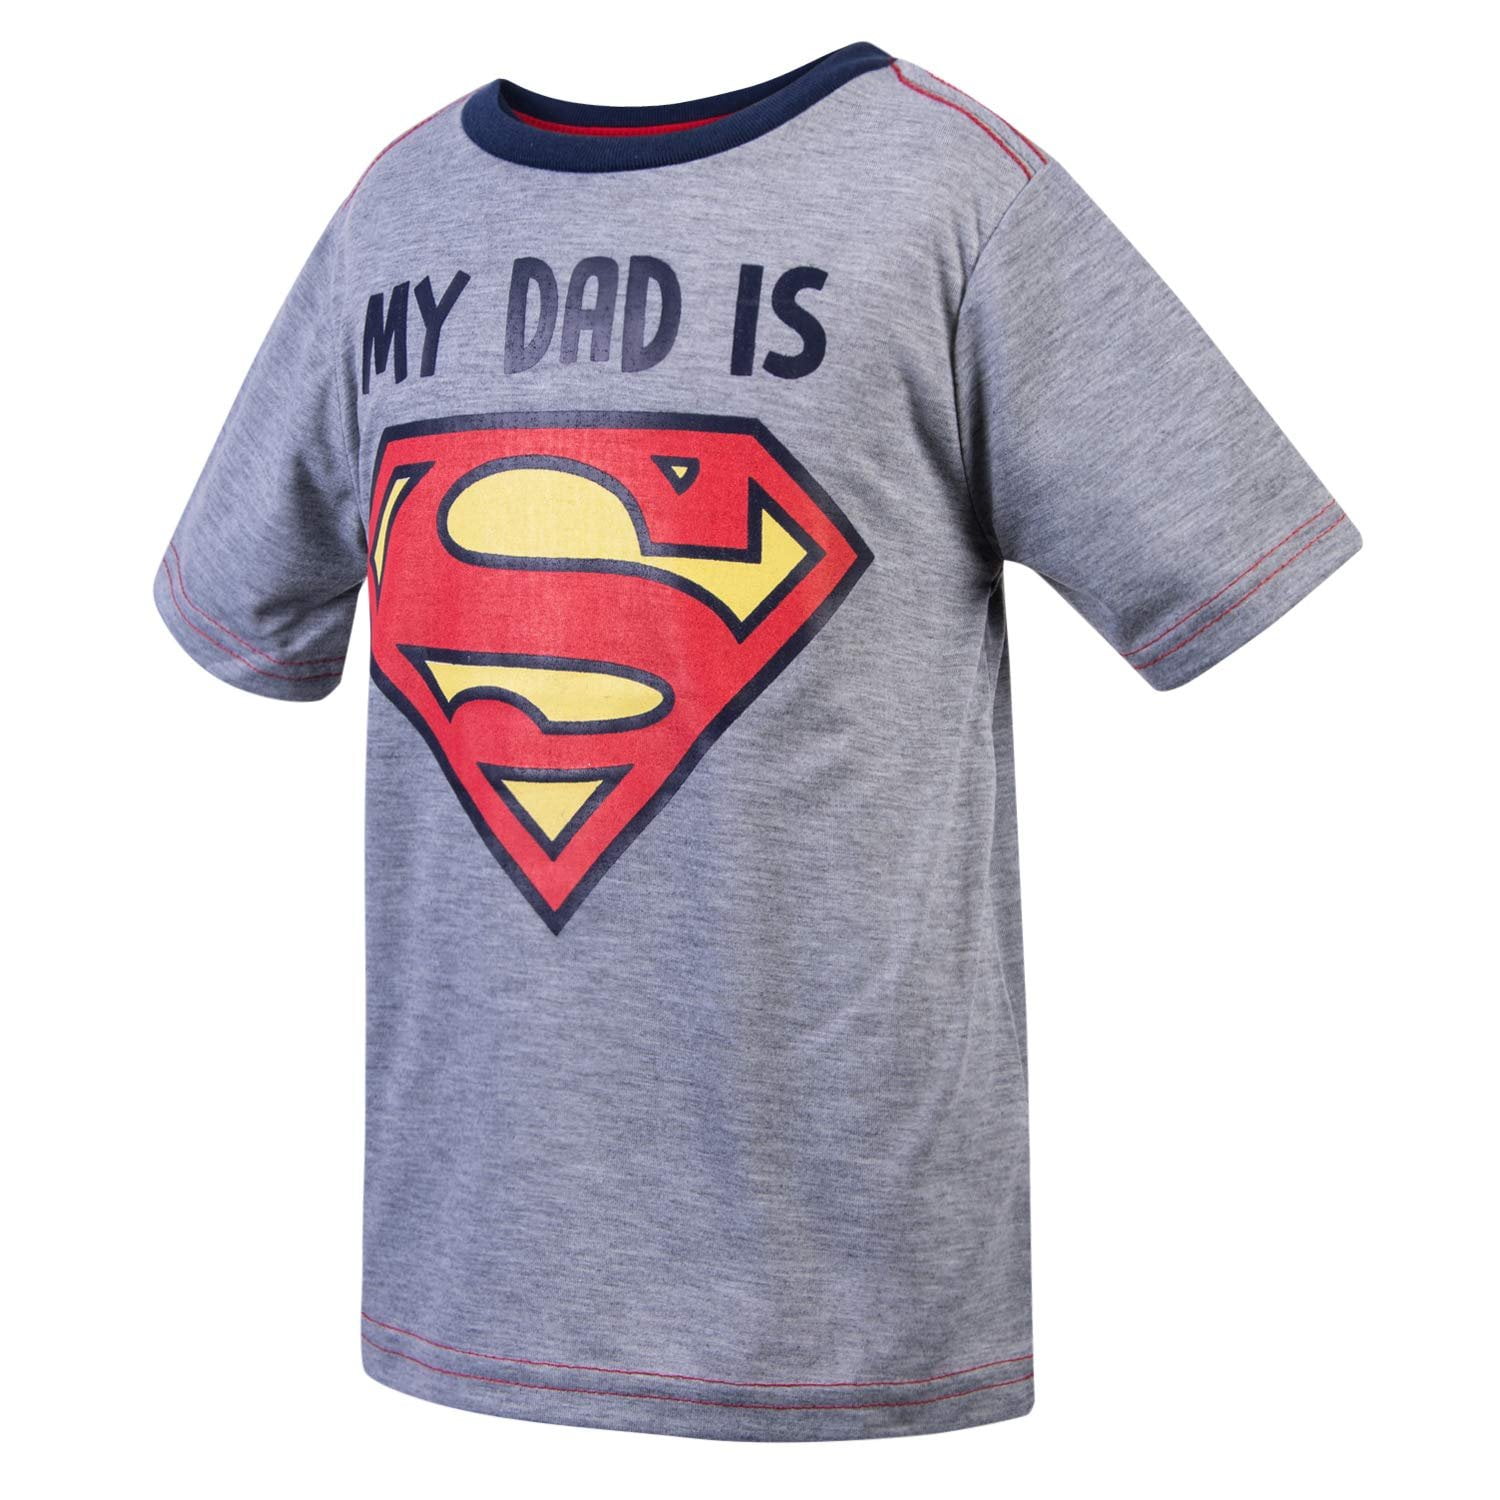 My Dad is Superman 4T Toddler T-Shirt-Toddler